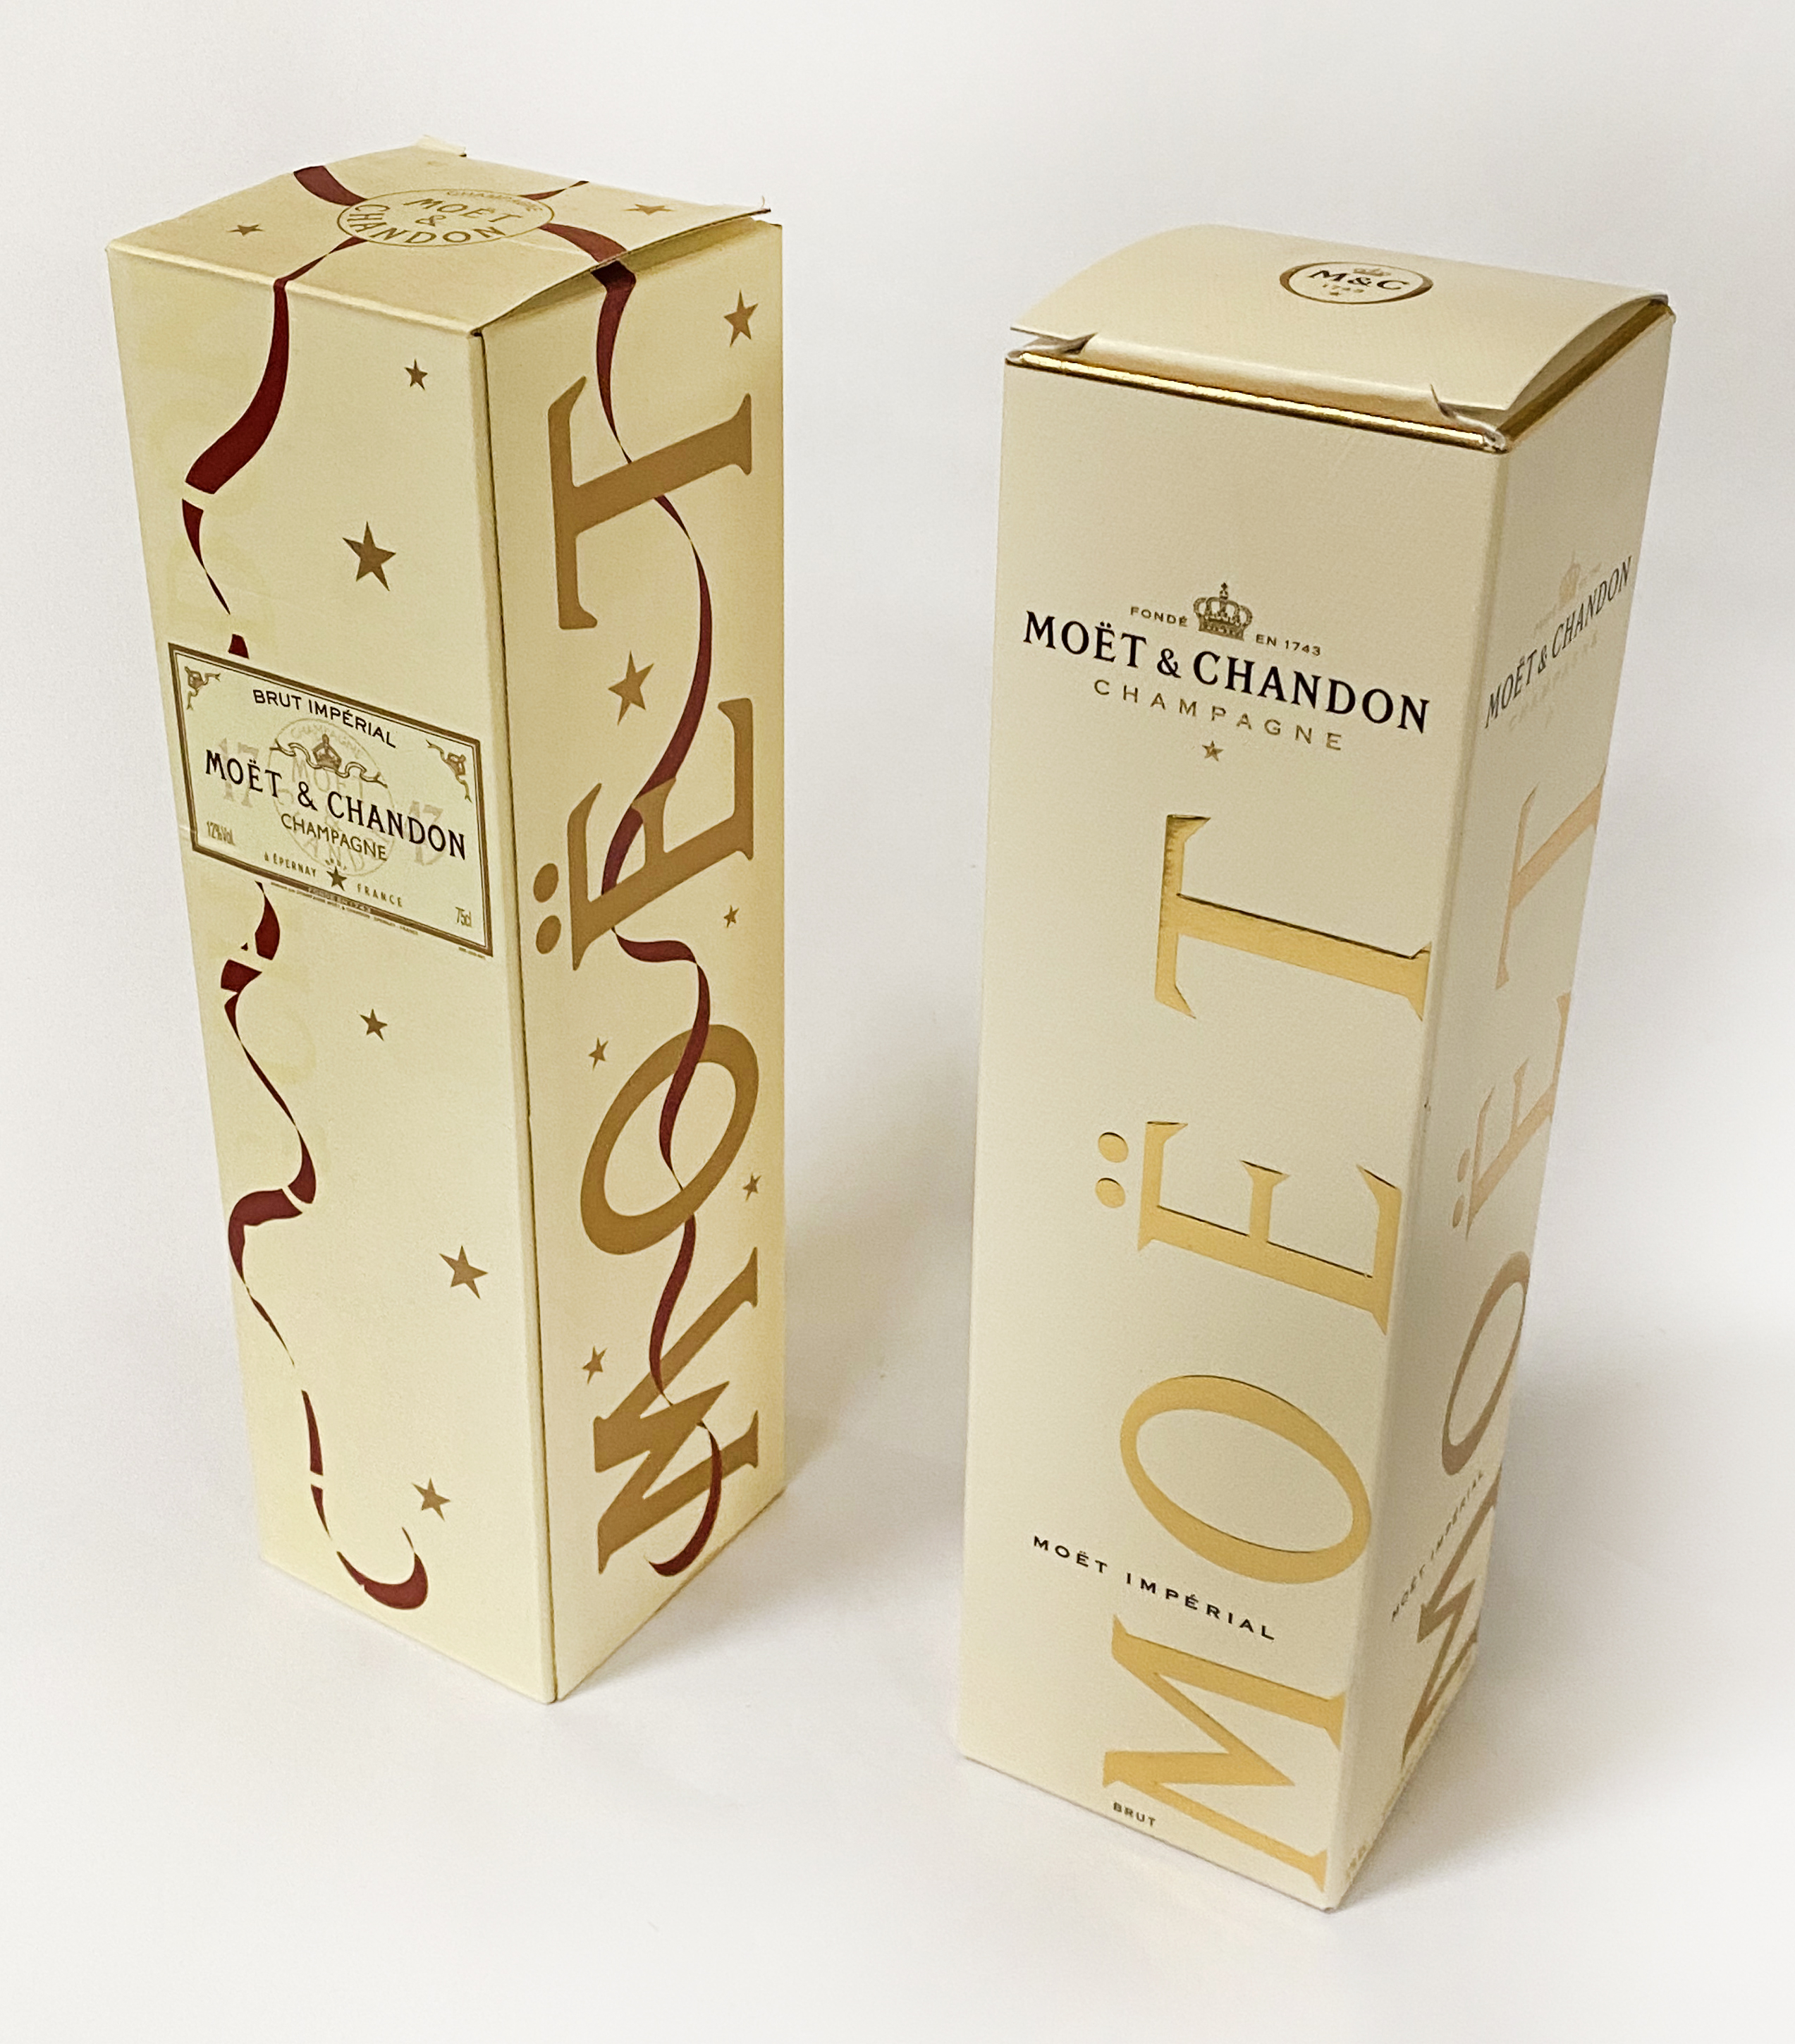 TWO MOET & CHANDON CHAMPAGNE BOTTLES - BOXED